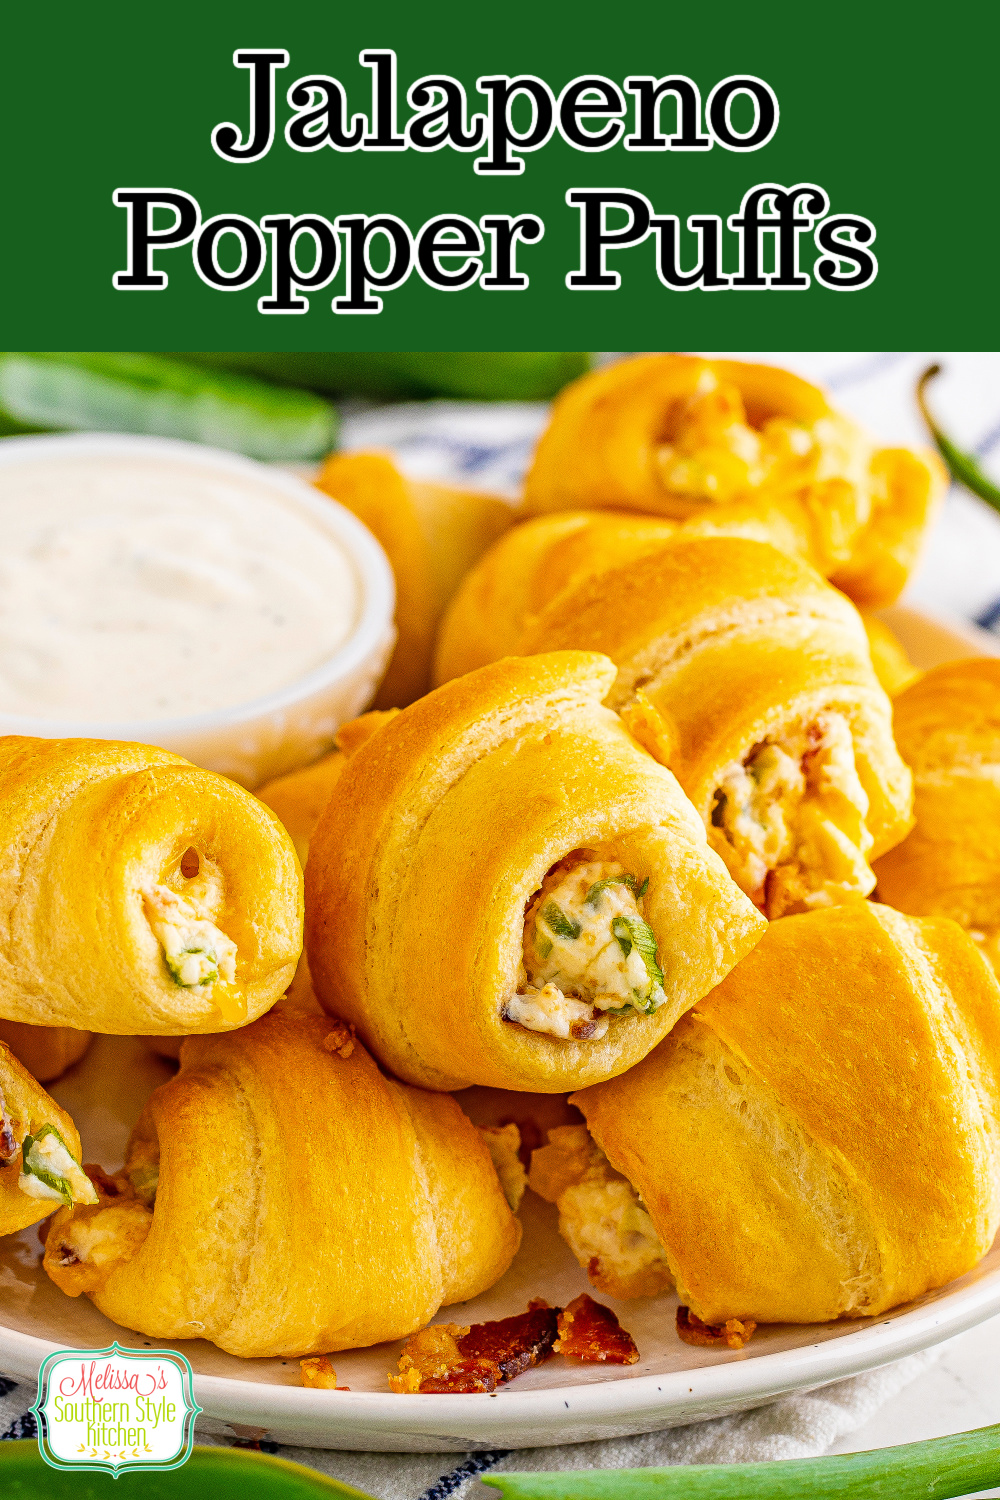 These easy Jalapeno Popper Puffs are stuffed with the same flavors featured in jalapeno poppers wrapped-up in crescent dough. #jalapenopoppers #puffs #bakedjalapenopoppers #crescentrolls #recipesusingcrescentrolls #easypoppersrecipe